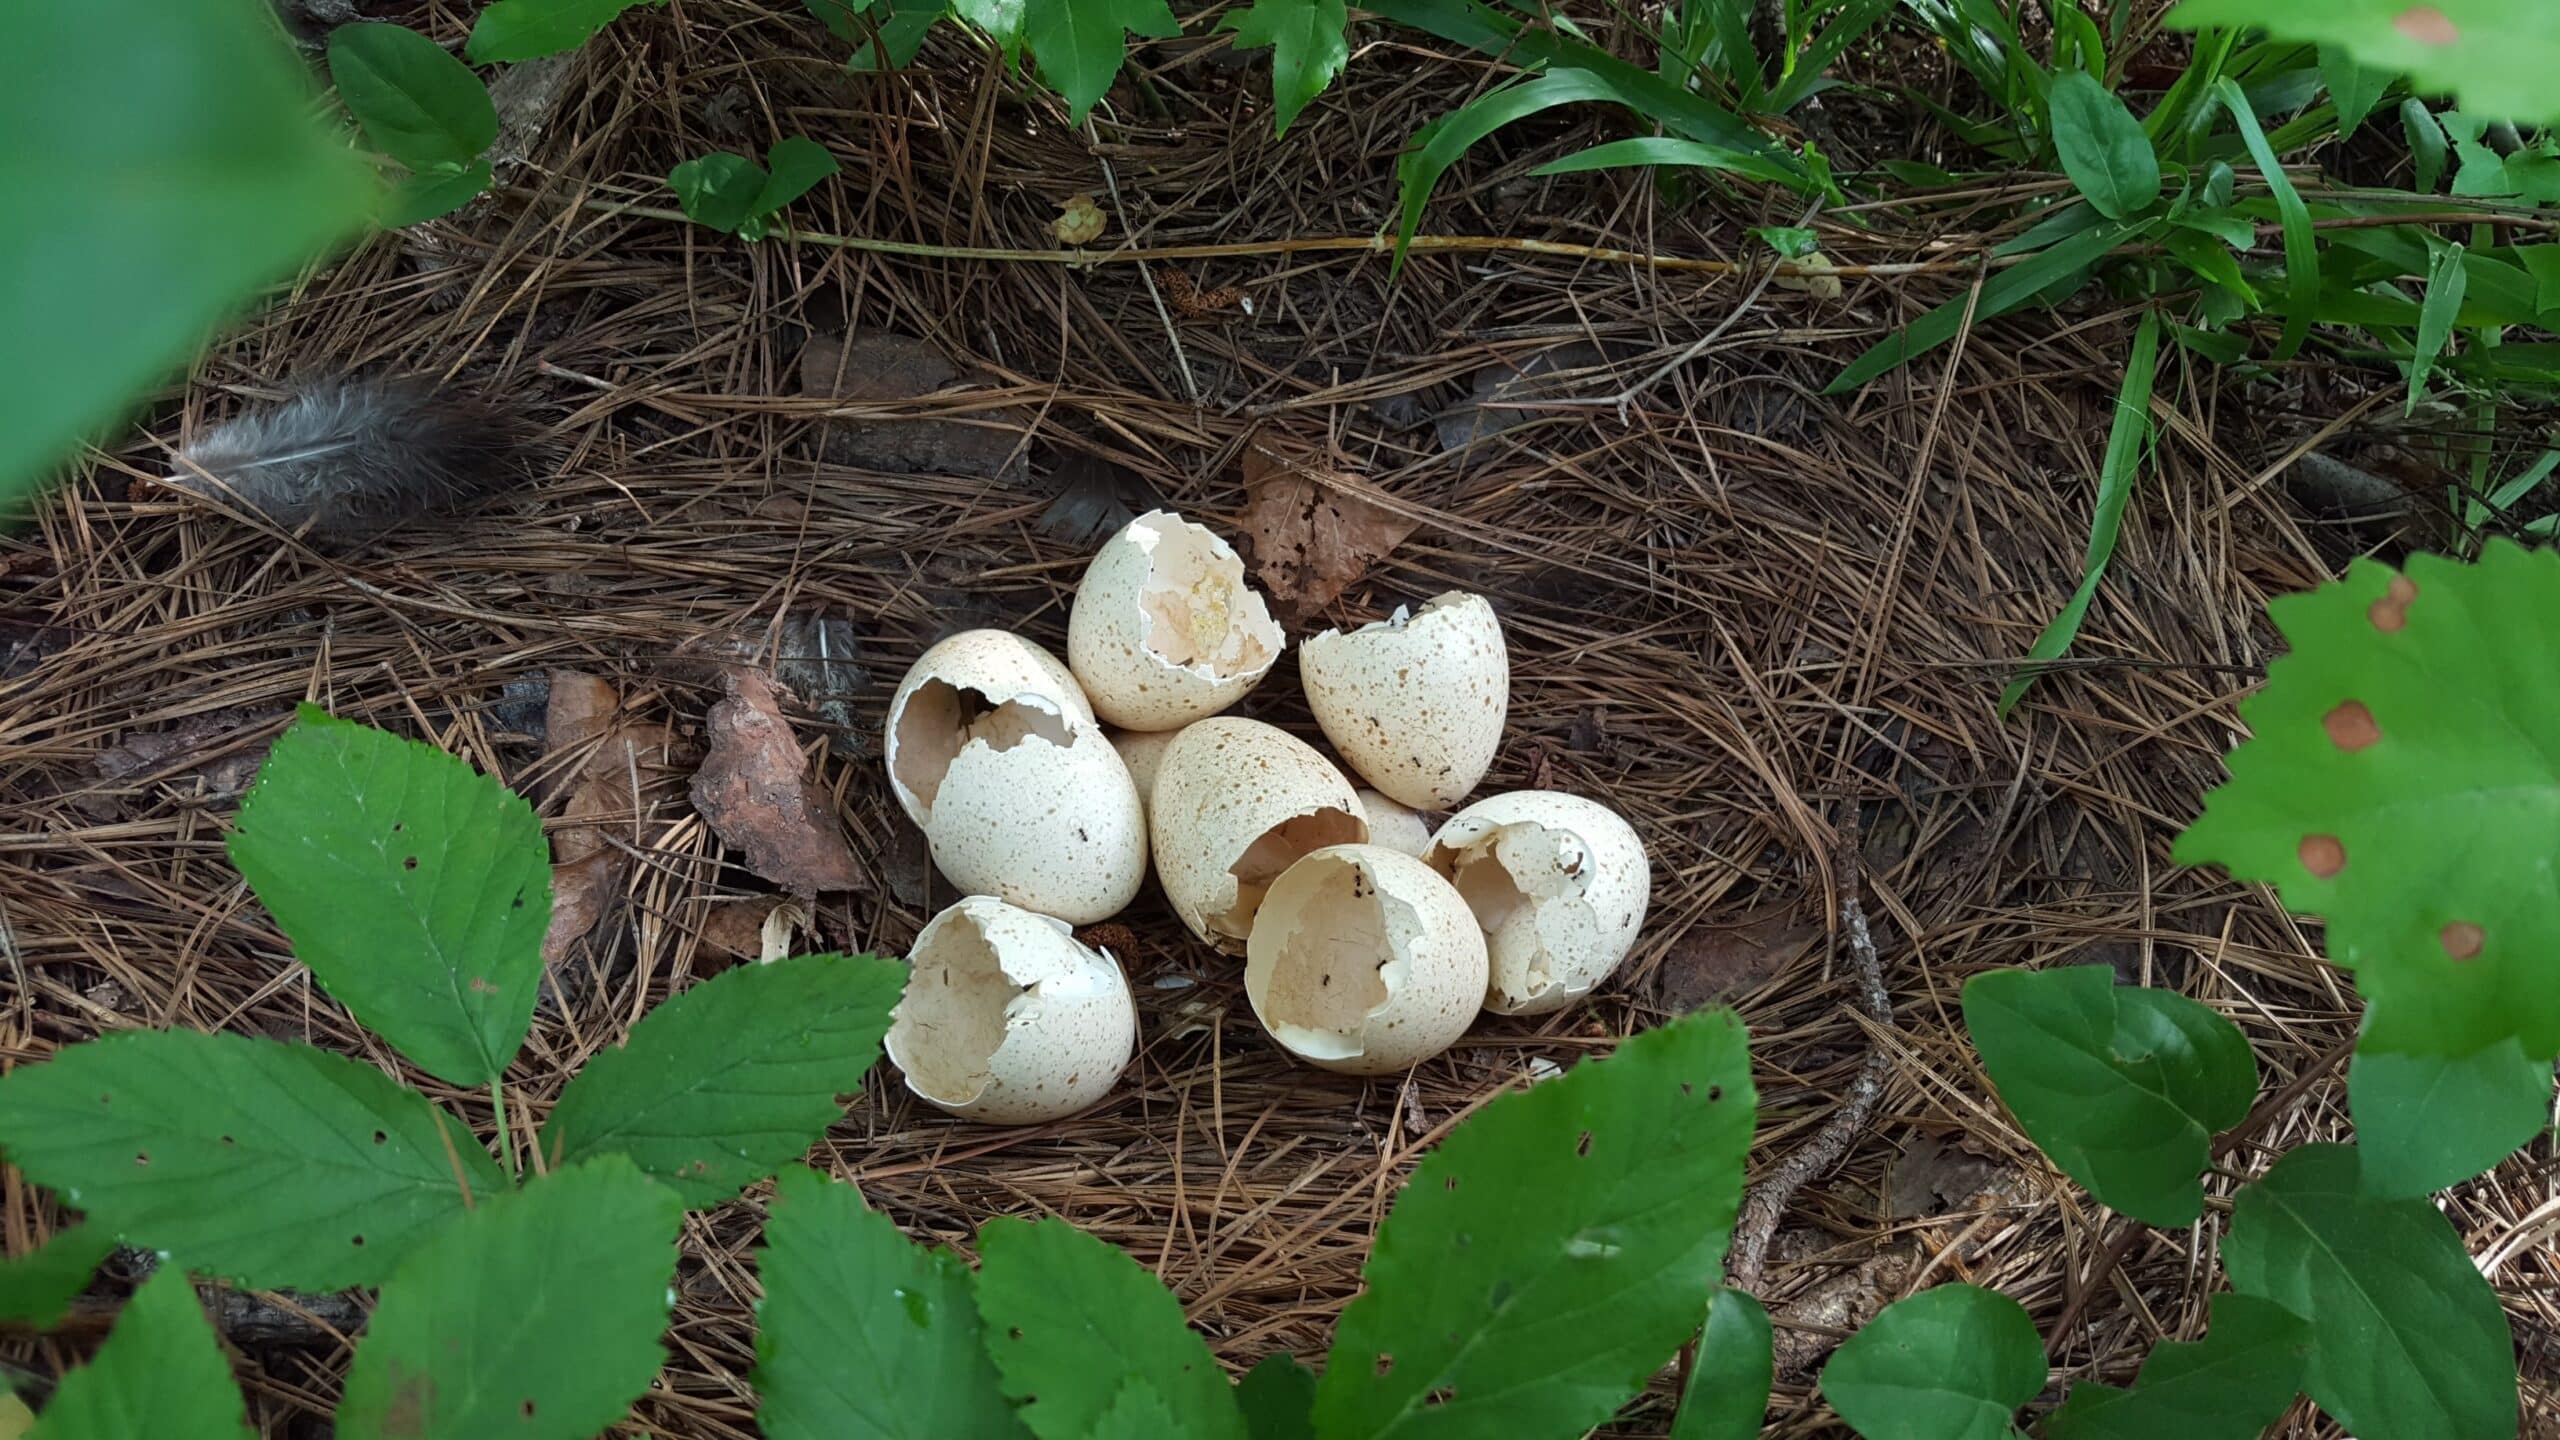 Hatched turkey eggs - Secrets of Wild Turkey Nesting Revealed - Forestry and Environmental Resources at NC State University